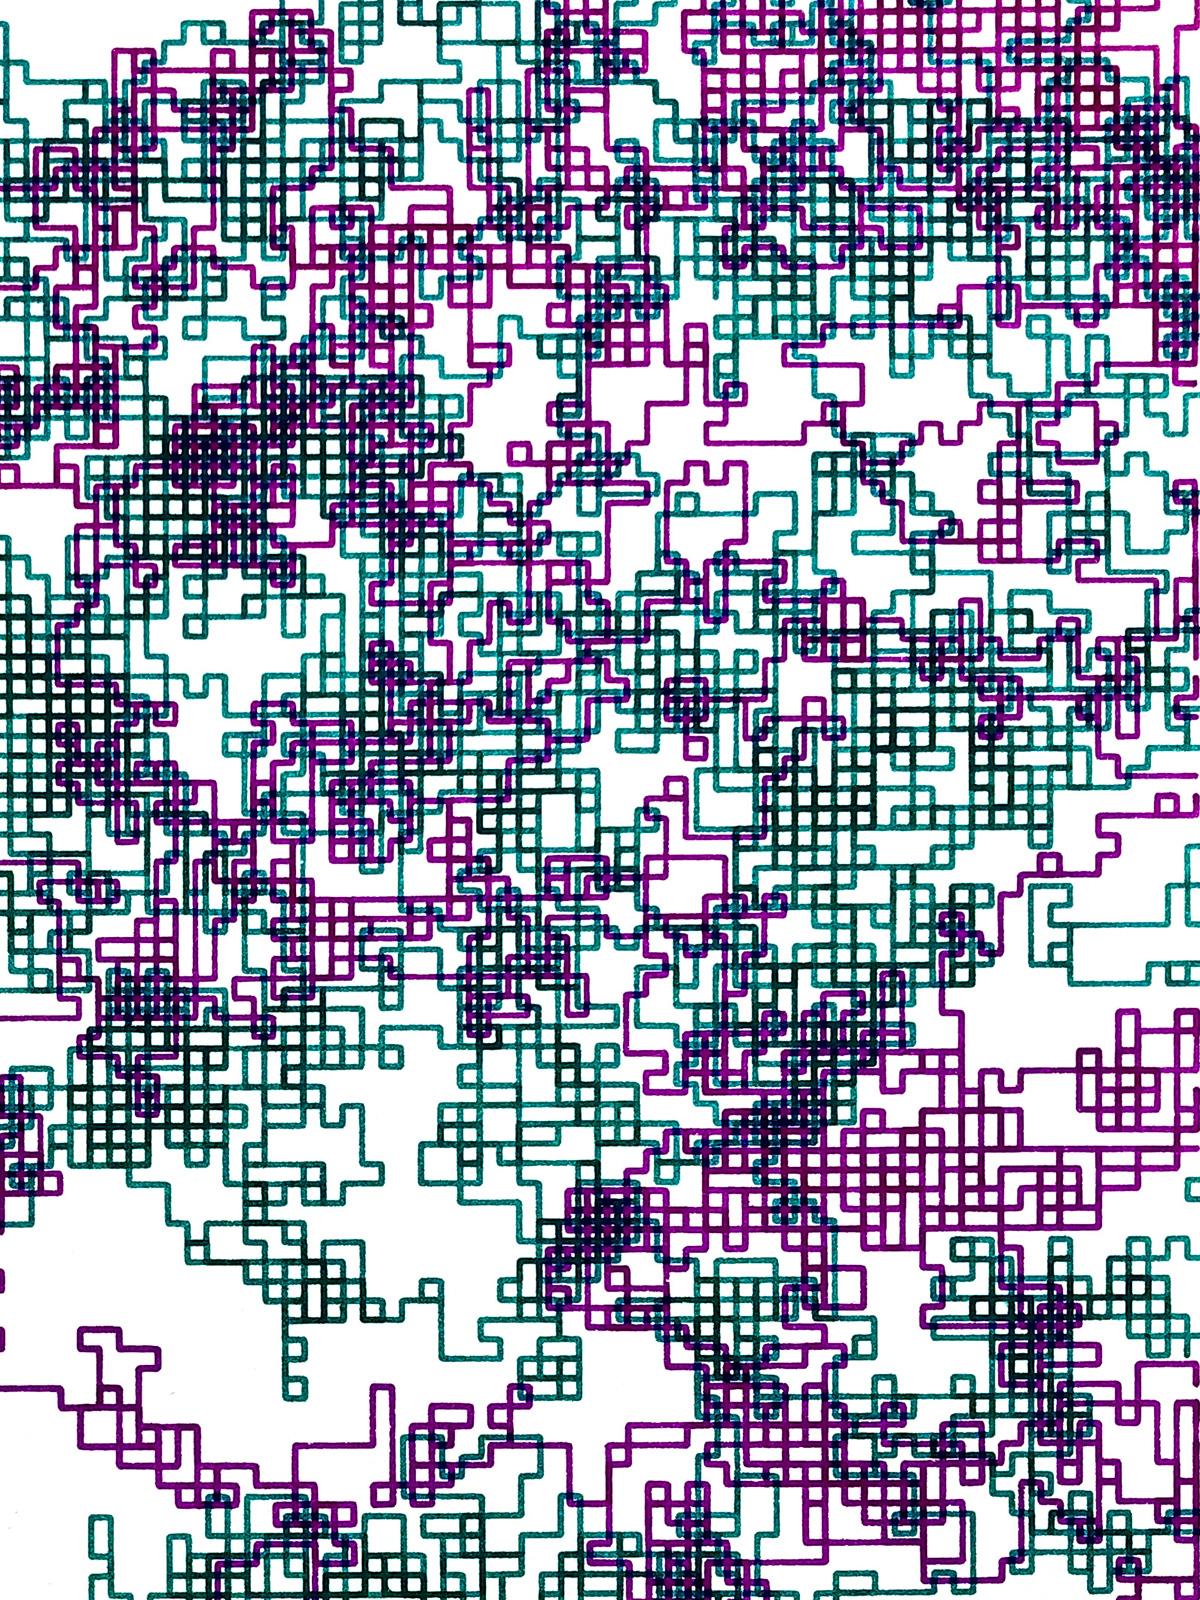 Purple and green lines on white paper. Each colour is slightly offset from each other so they overlap, but not completely. Each set of lines is mainly comprise of clusters of squares, with short straight lines connecting them. Some squares appear much darker, where they have been drawn over multiple times